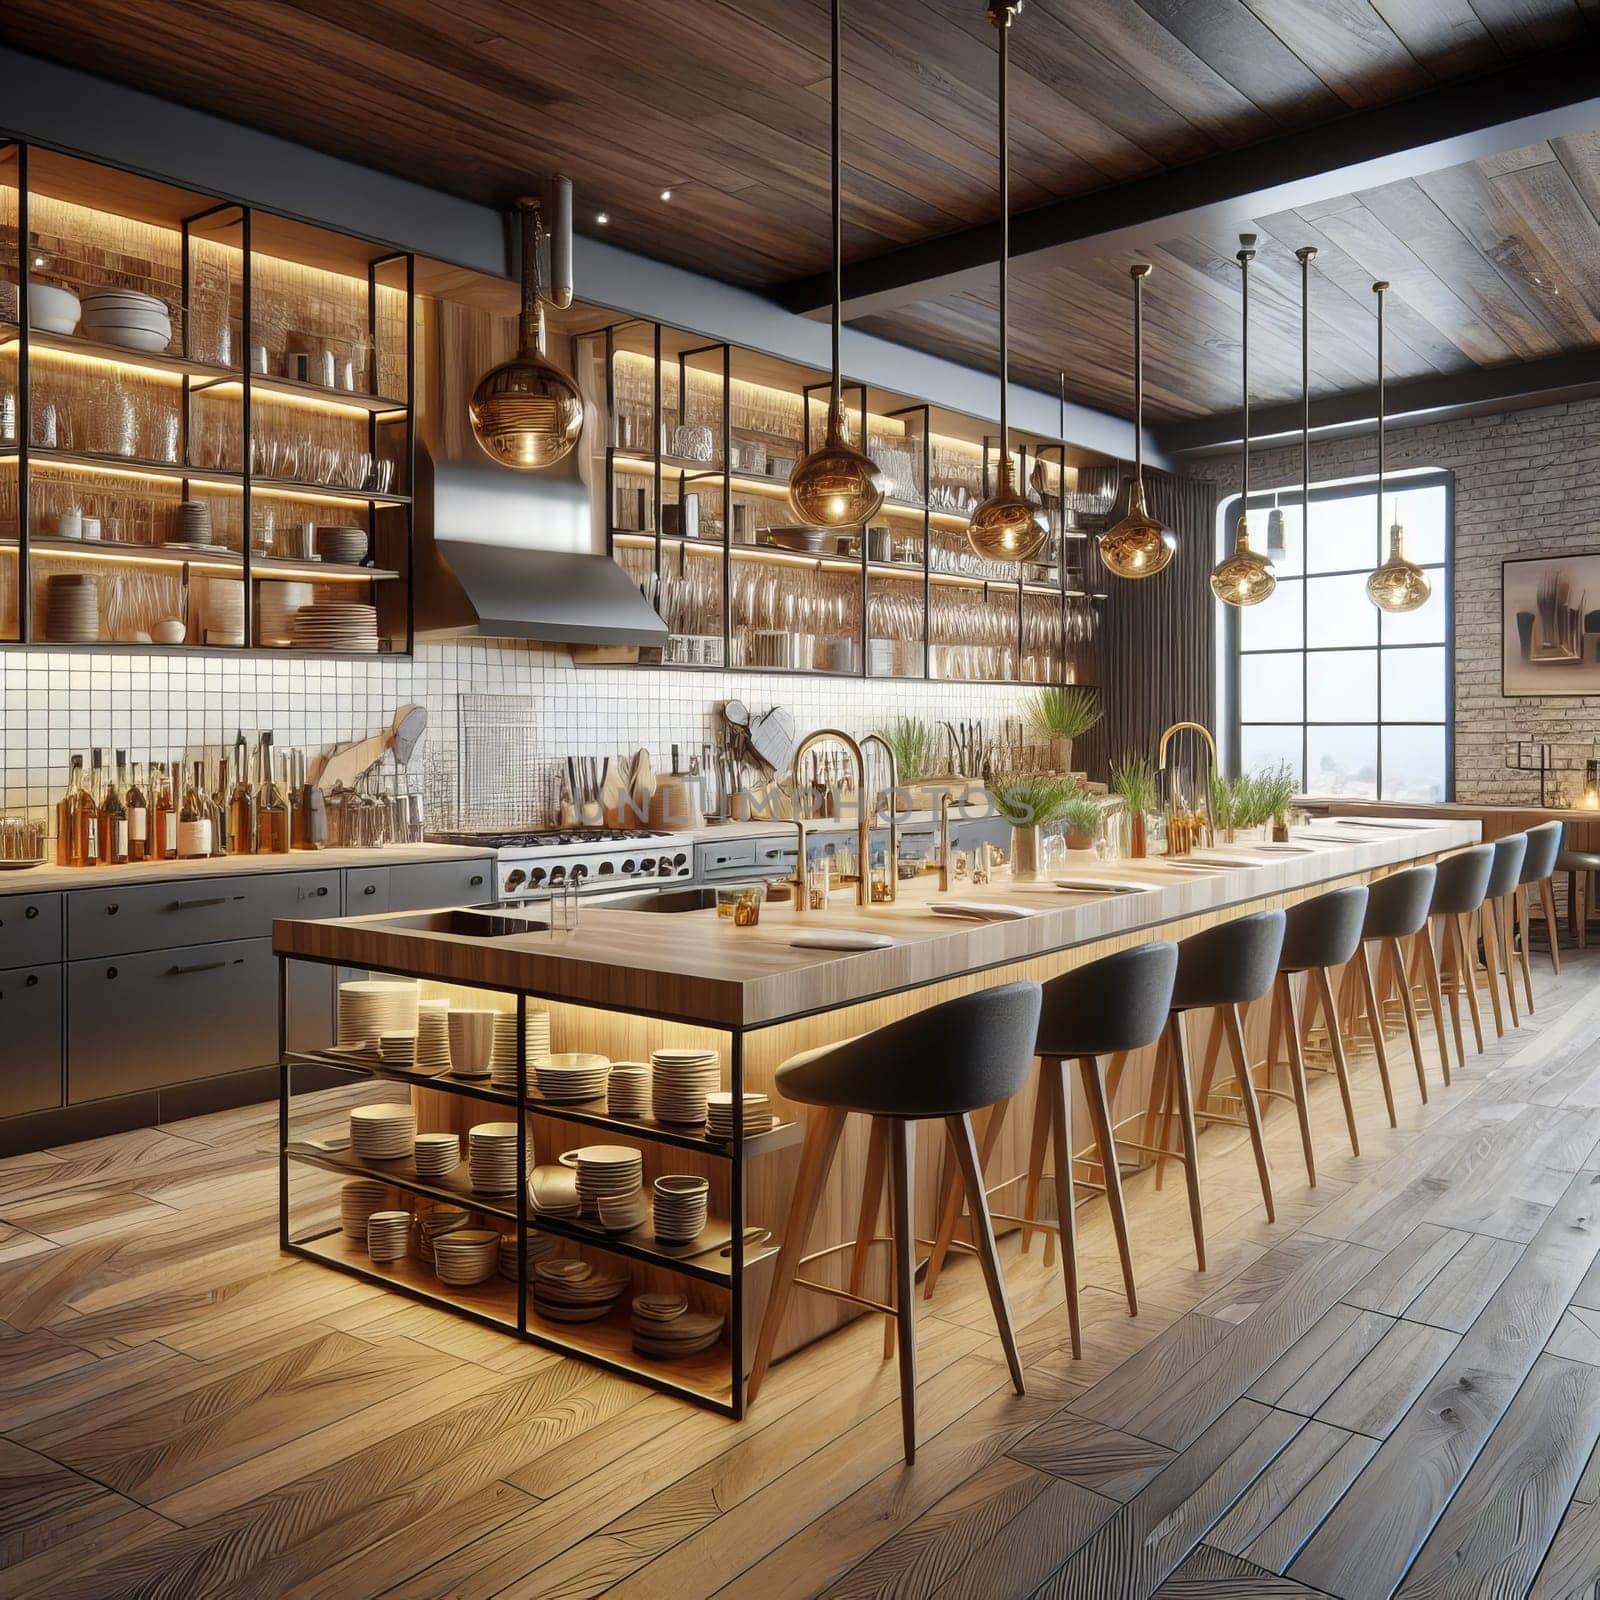 Modern kitchen with a large island and bar seating, wooden floor, and a brick wall with shelves and hanging lights